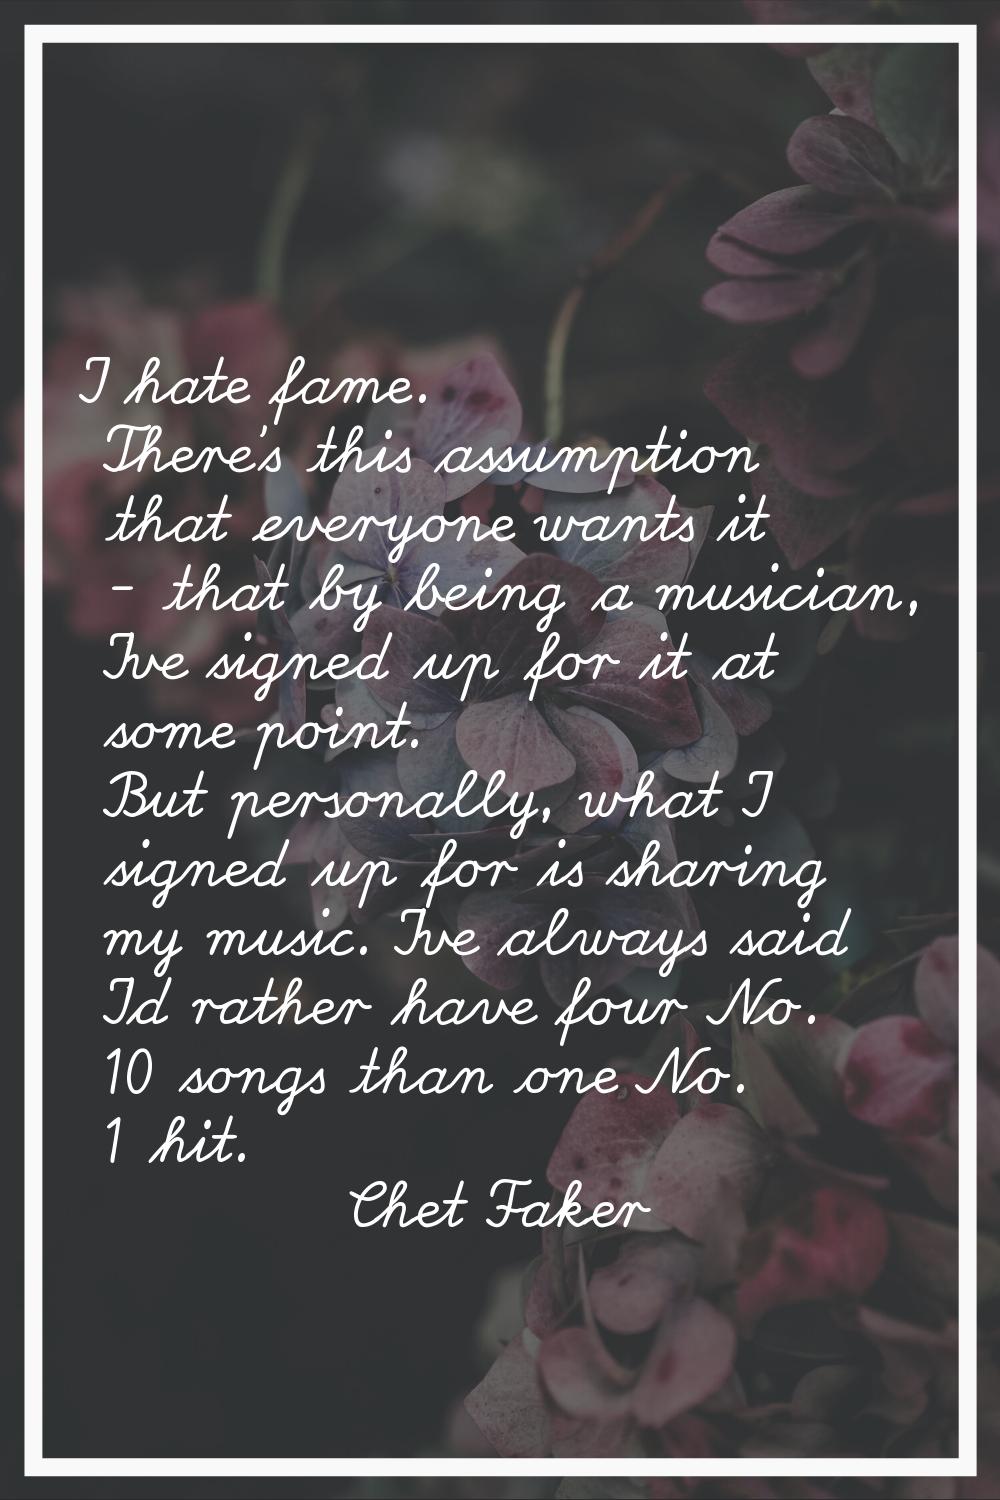 I hate fame. There's this assumption that everyone wants it - that by being a musician, I've signed